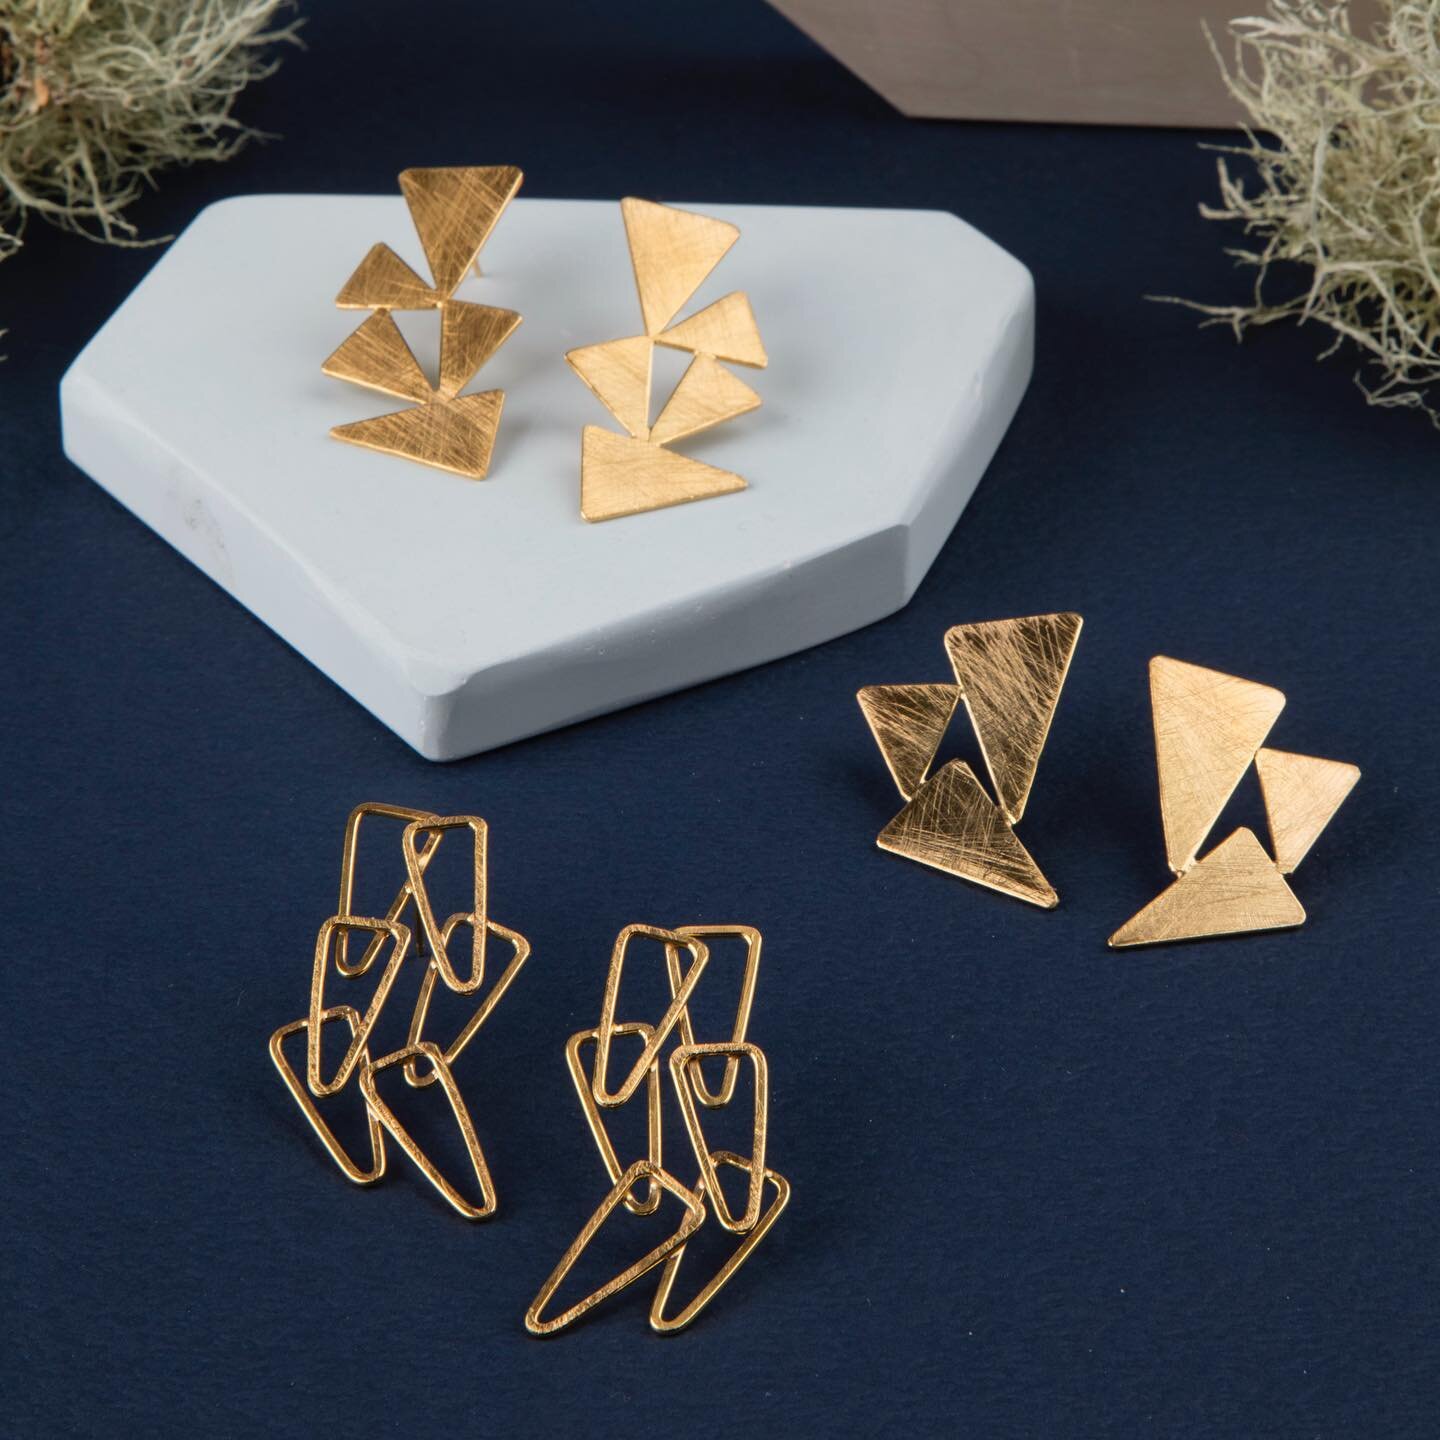 G O L D P L A T E D 
Here&rsquo;s a selection of 18ct gold plated earrings available on my website. Each pair are meticulously hand made in the studio in Glasgow. 
You can visit the workshop from this Friday 11-4 or Saturday 11-5.
#gold #glasgow #sco